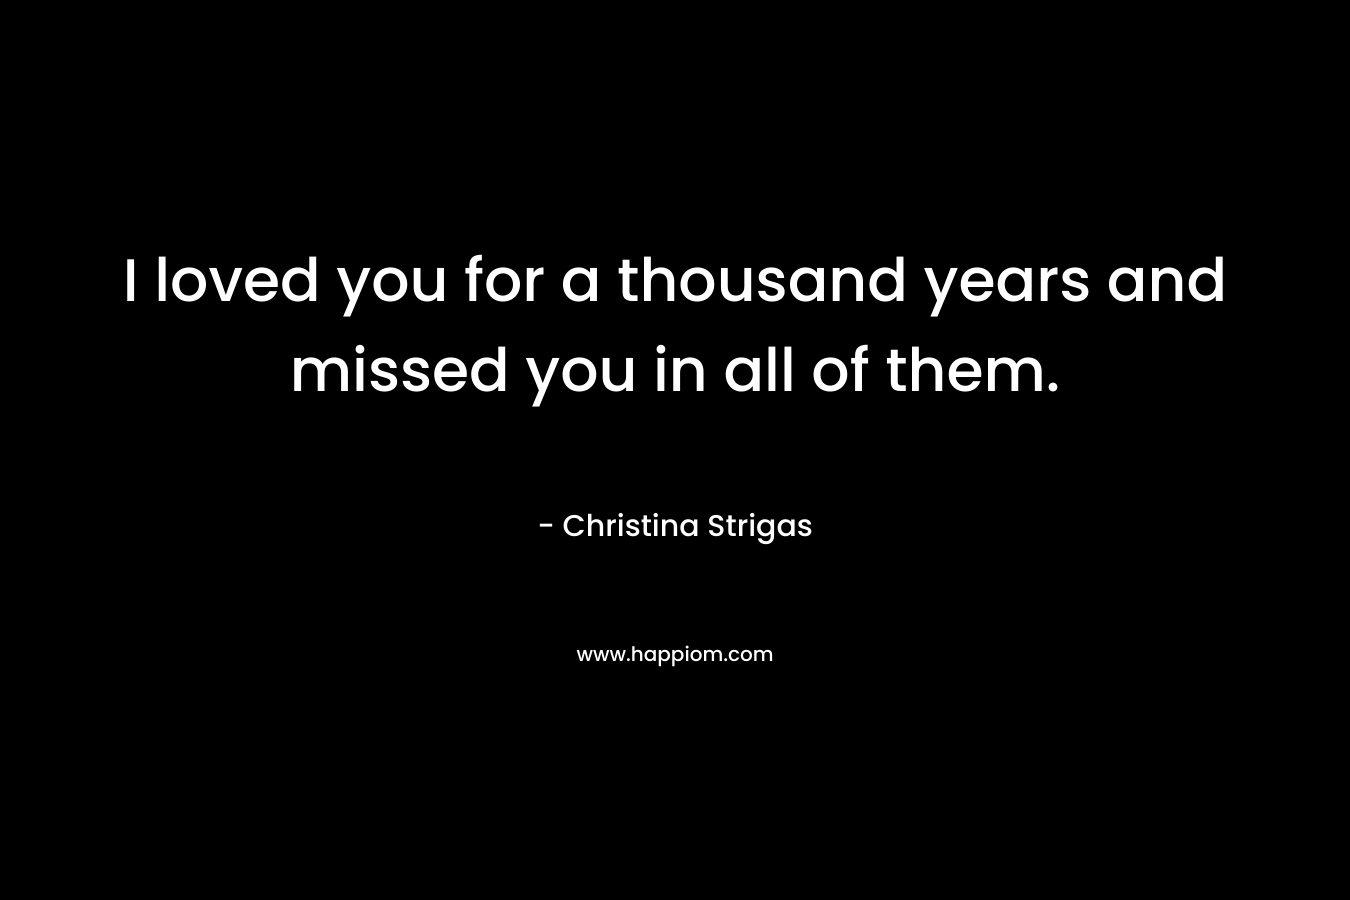 I loved you for a thousand years and missed you in all of them.